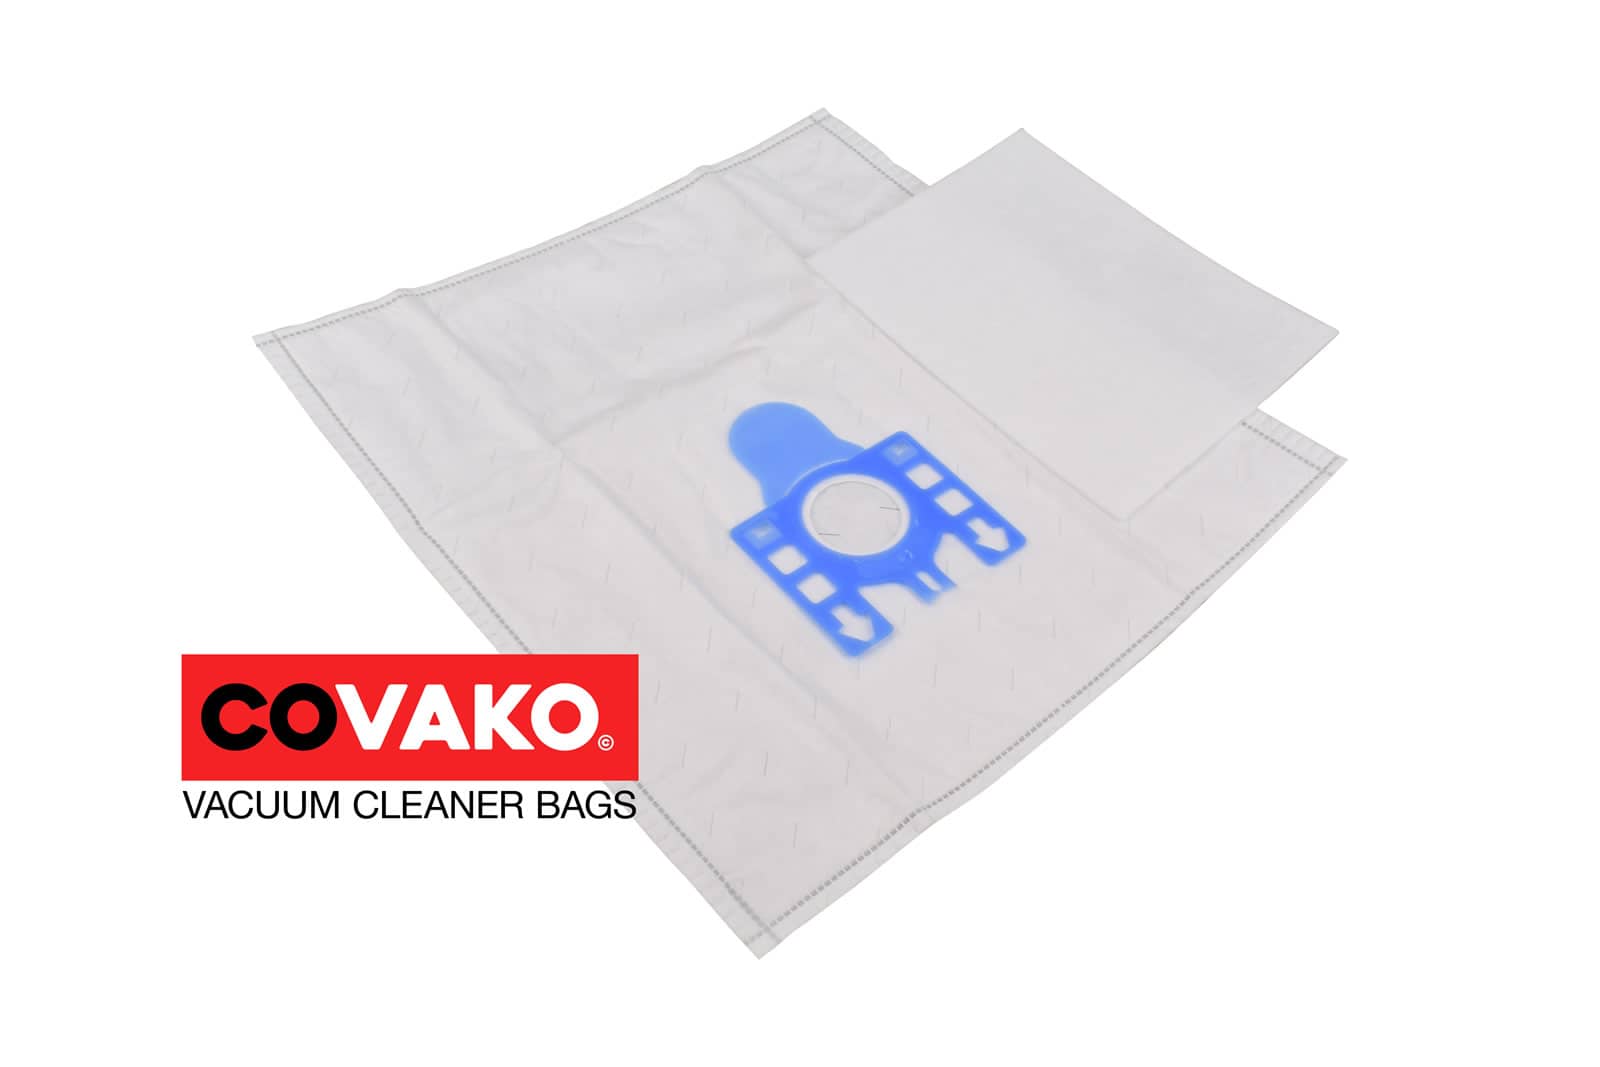 Miele S800-S899 Serie / Synthesis - Miele vacuum cleaner bags